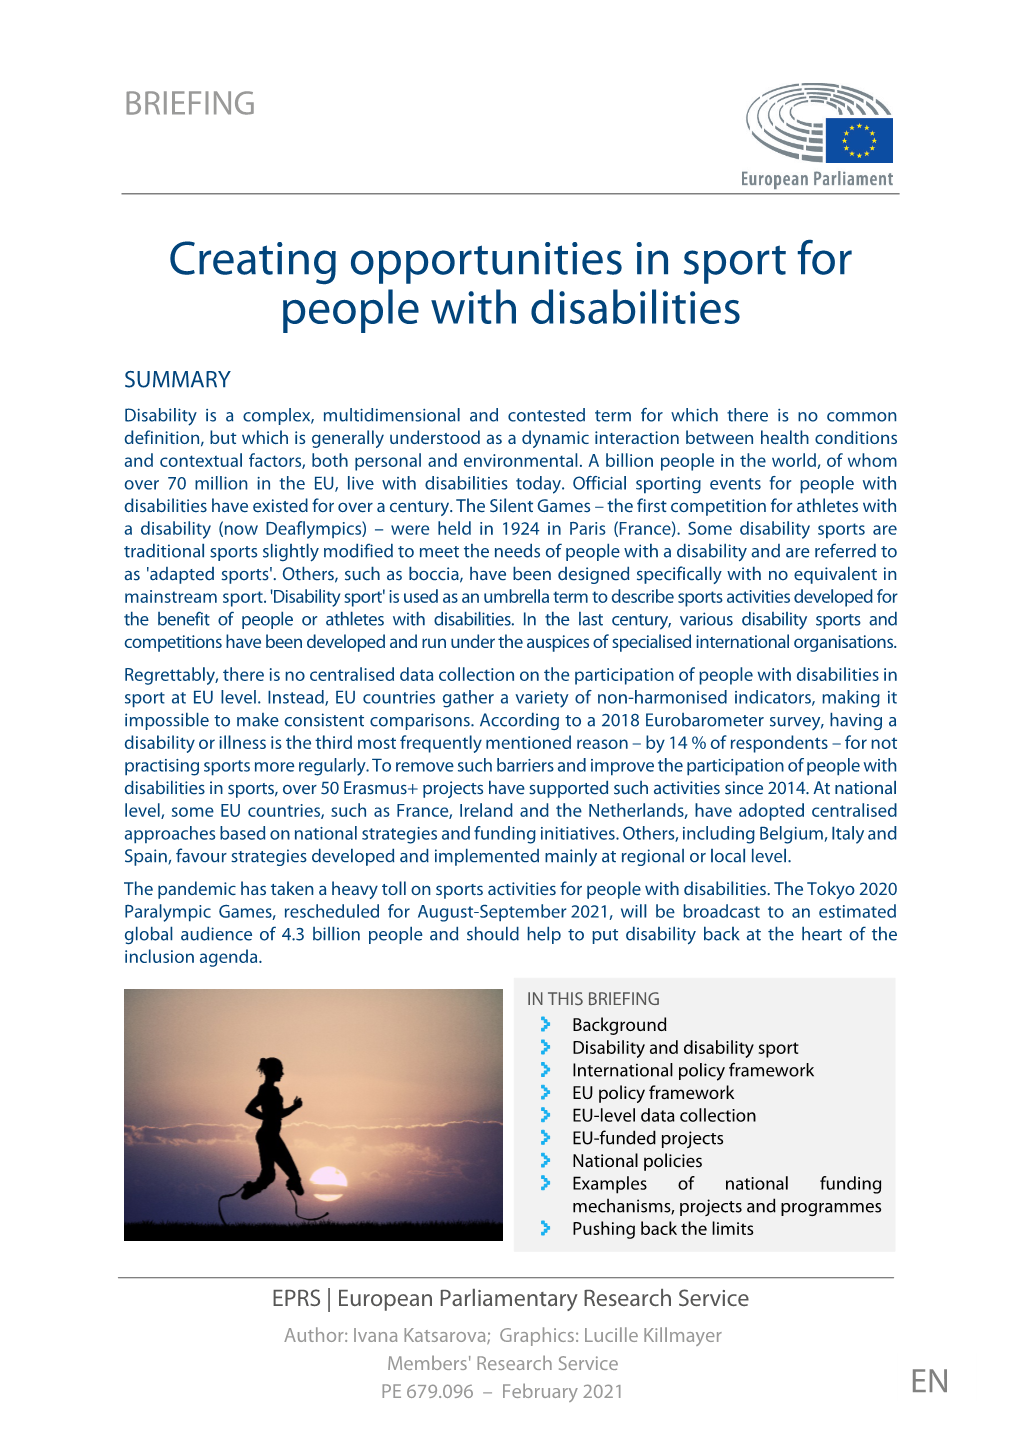 Creating Opportunities for Disabled Persons in Sport